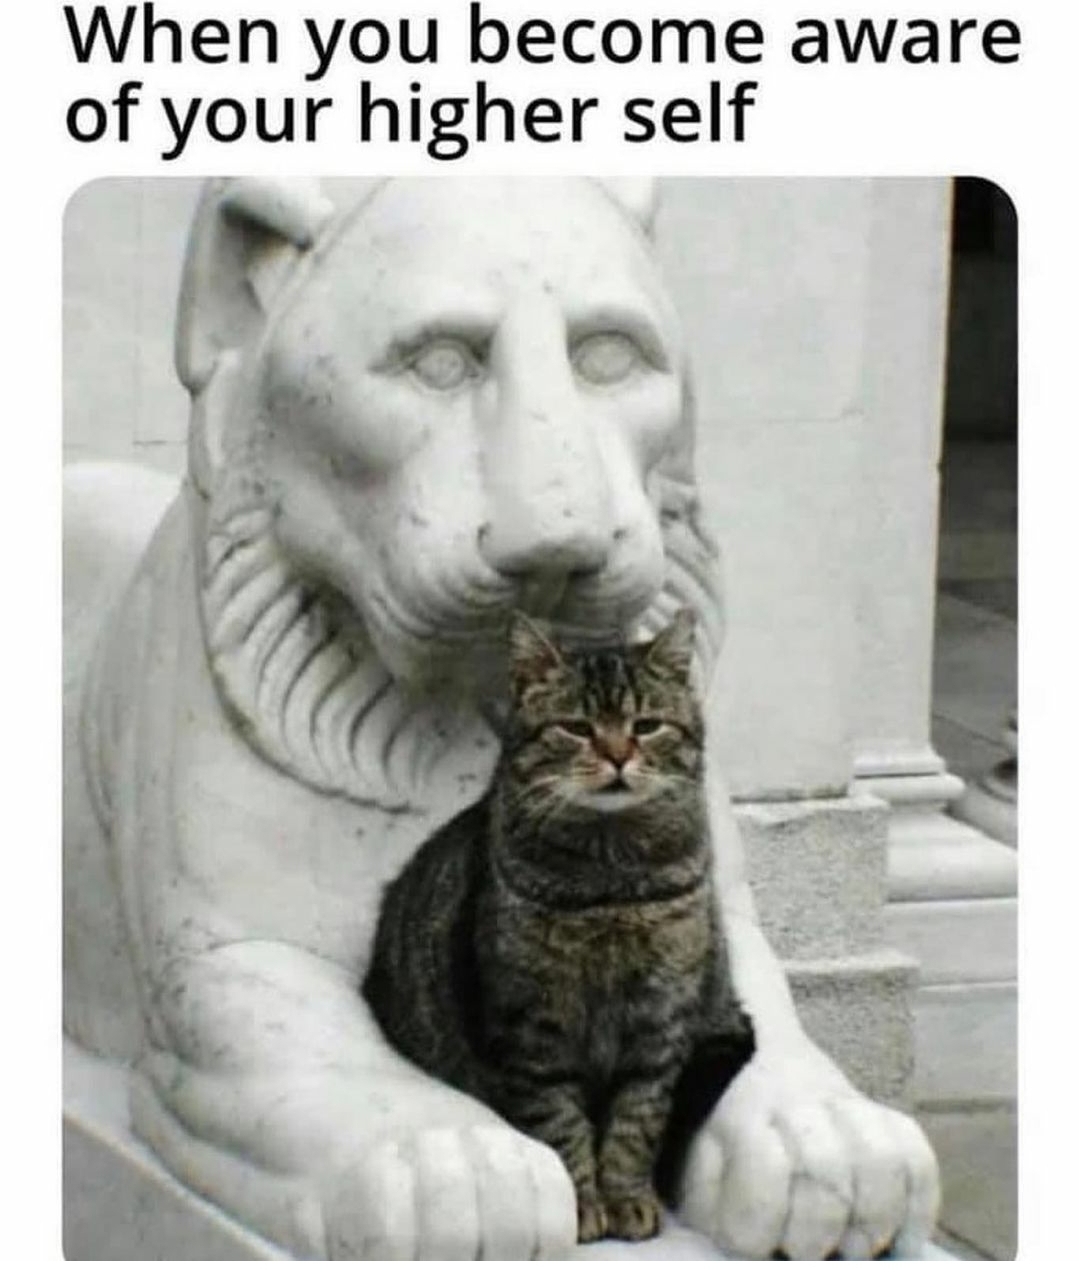 dank memes - funny memes - cats sitting on statues - When you become aware of your higher self